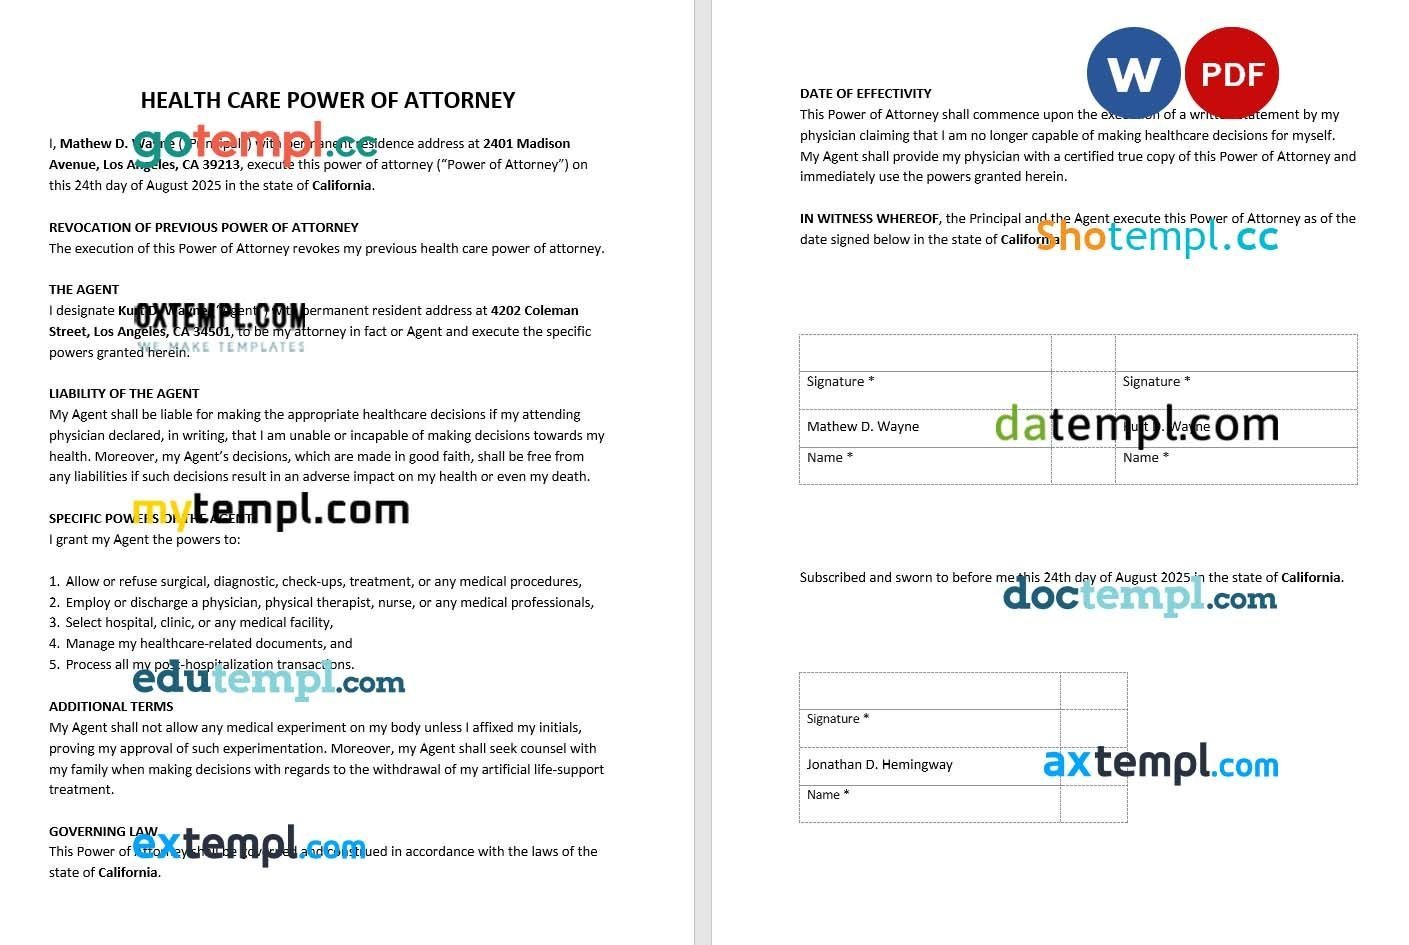 Health Care Power of Attorney Form example, fully editable